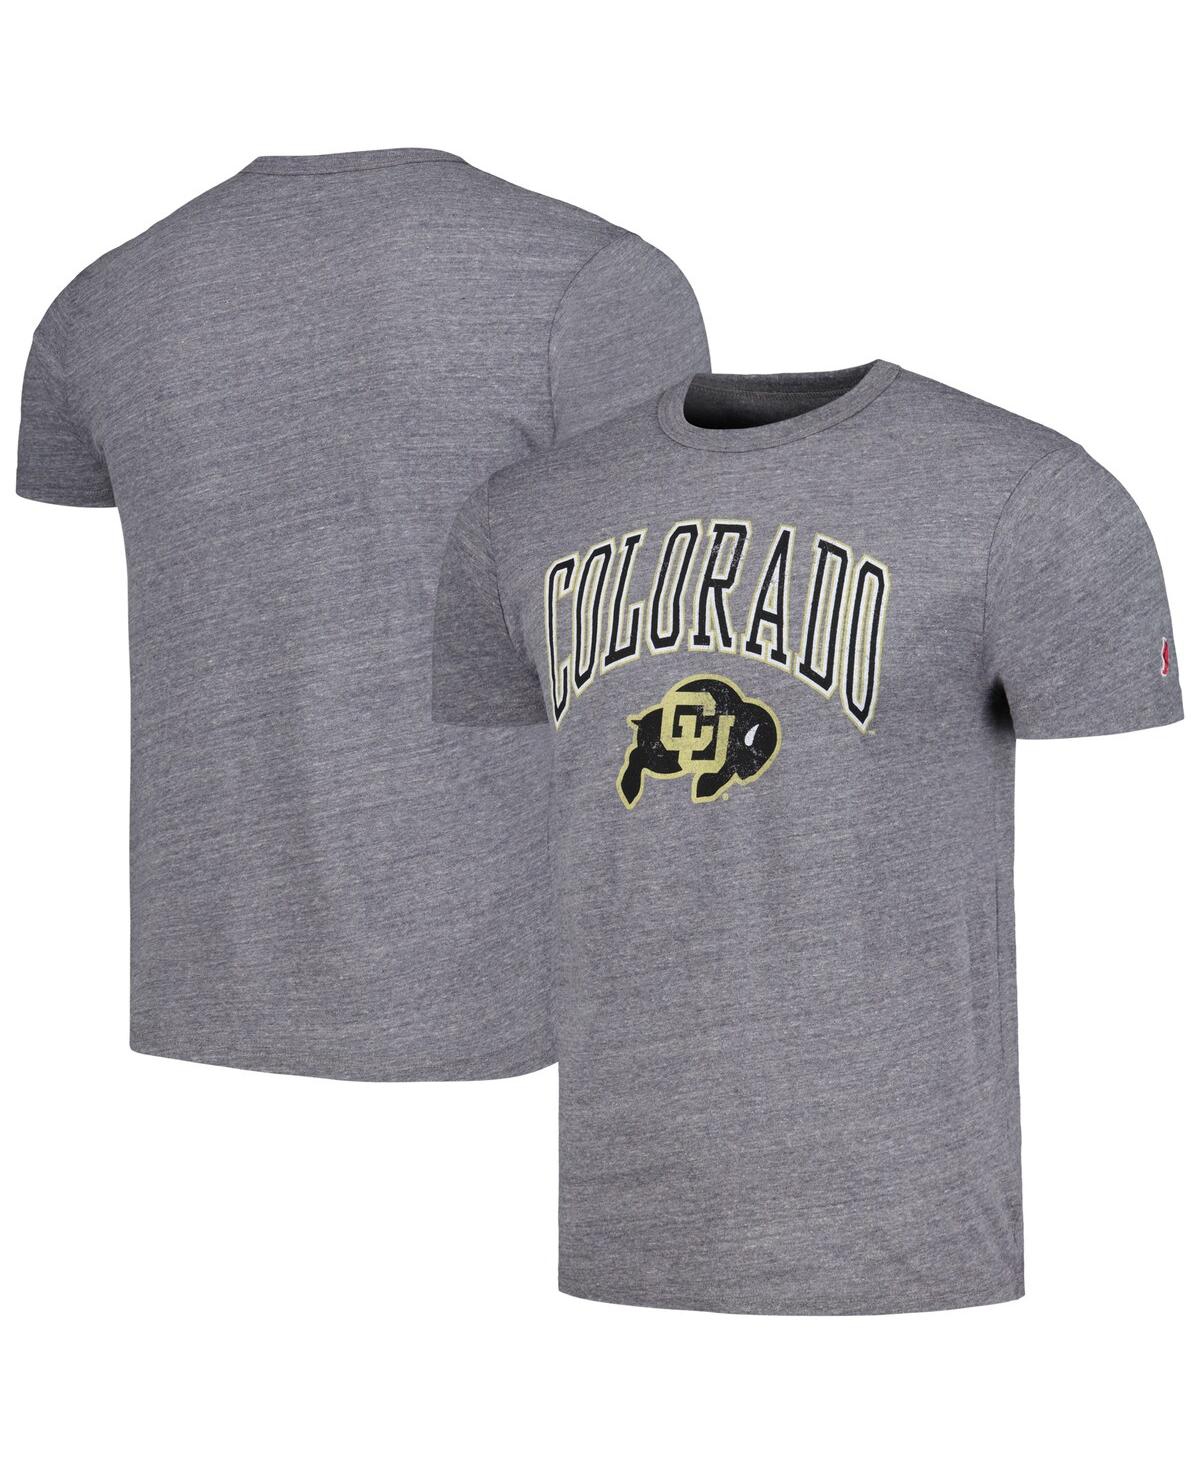 Men's League Collegiate Wear Heather Gray Distressed Colorado Buffaloes Tall Arch Victory Falls Tri-Blend T-shirt - Heather Gray